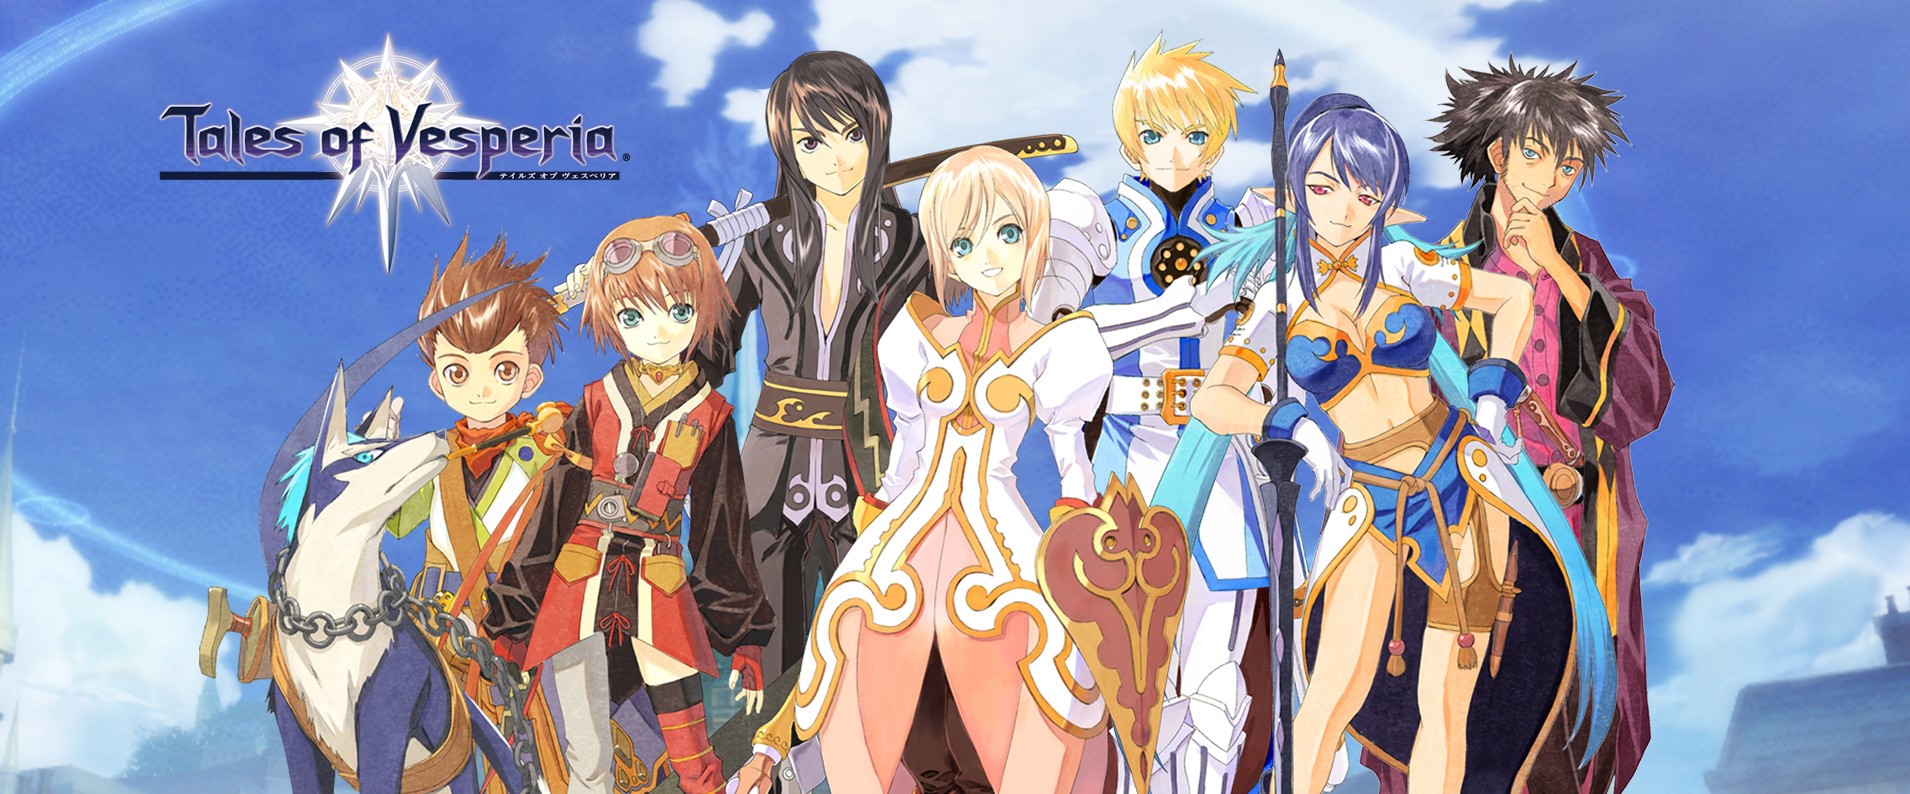 The characters from tales of vesperia standing like theyre taking a group photo.